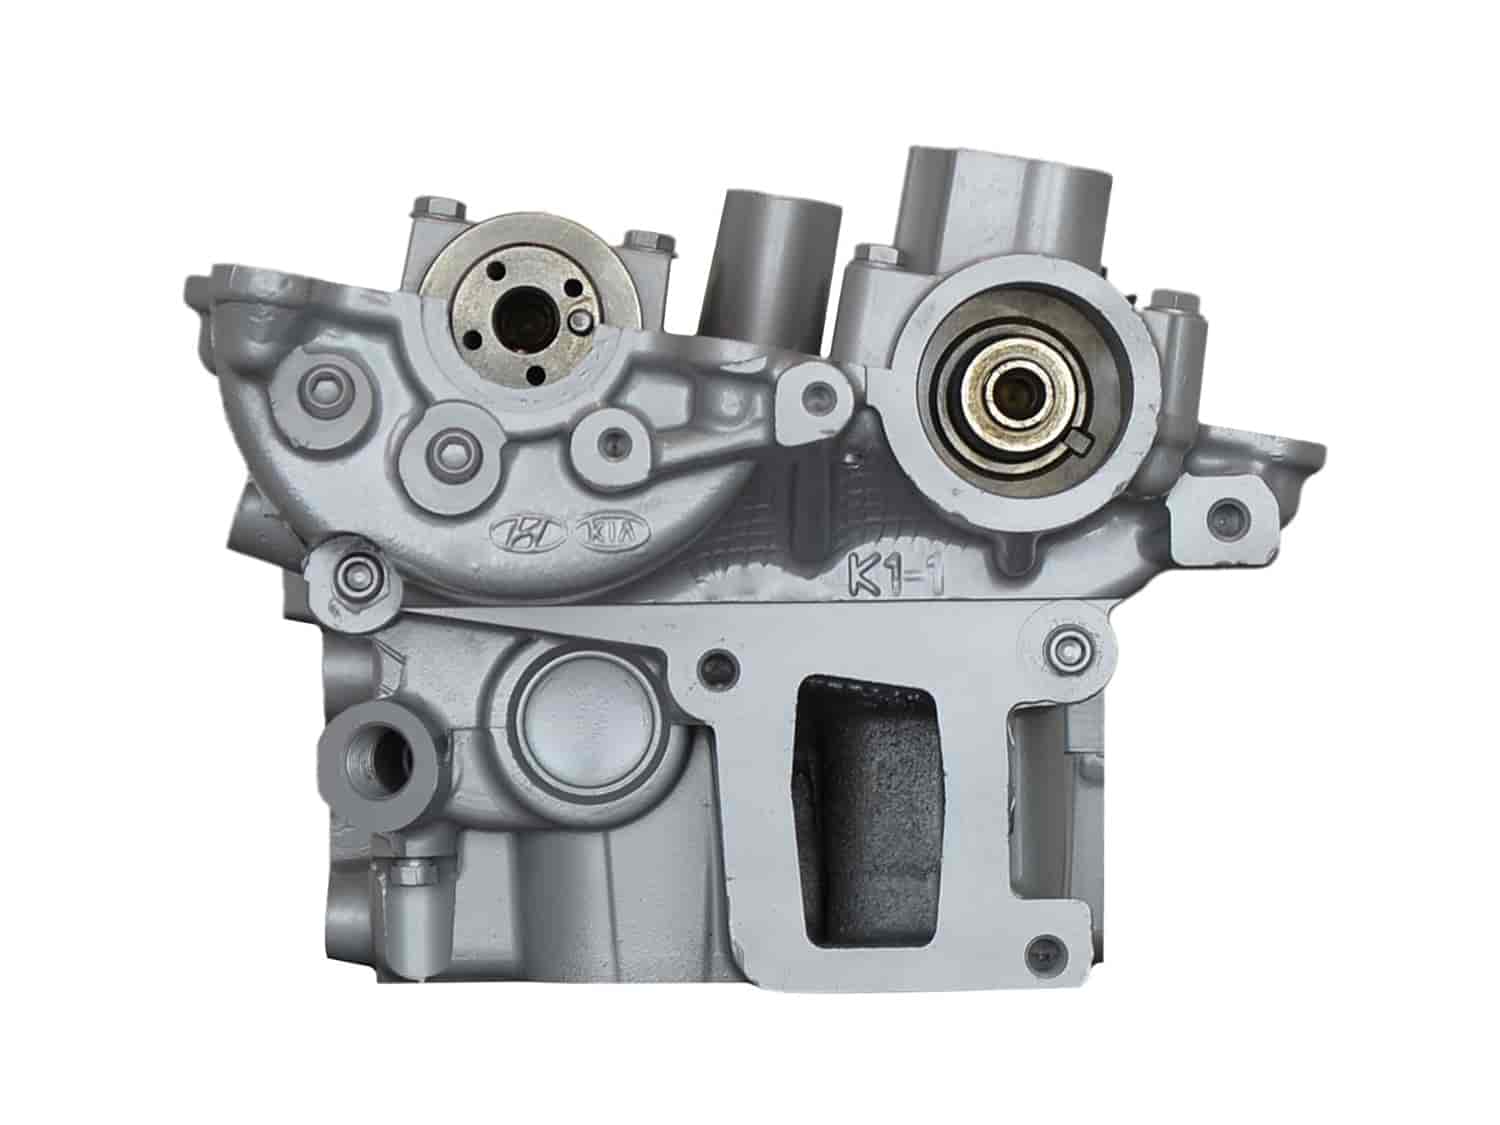 Remanufactured Cylinder Head for 2006-2012 Hyundai with 1.6L L4